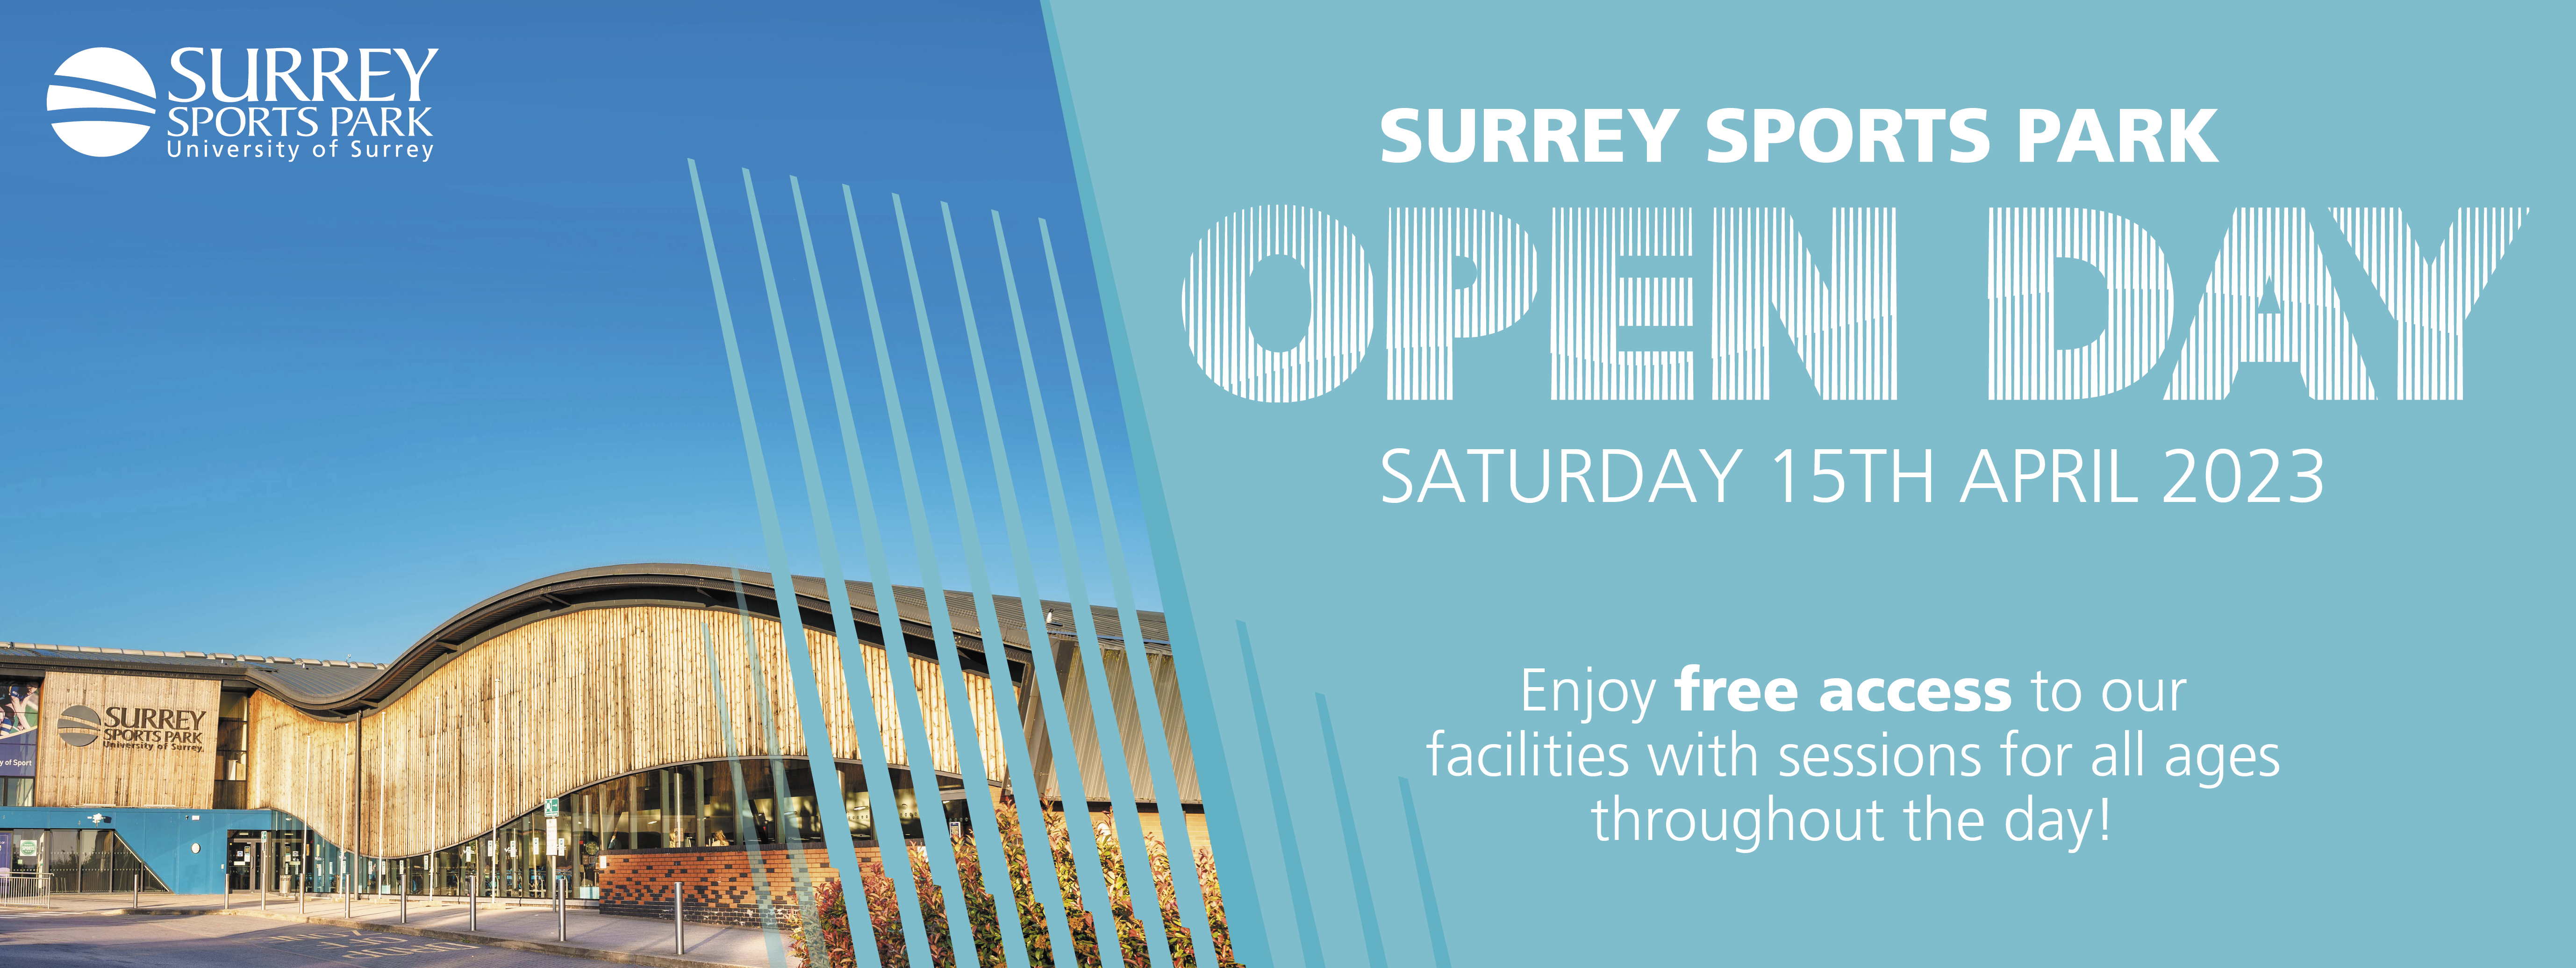 View the SSP Open Day timetable & book your sessions!